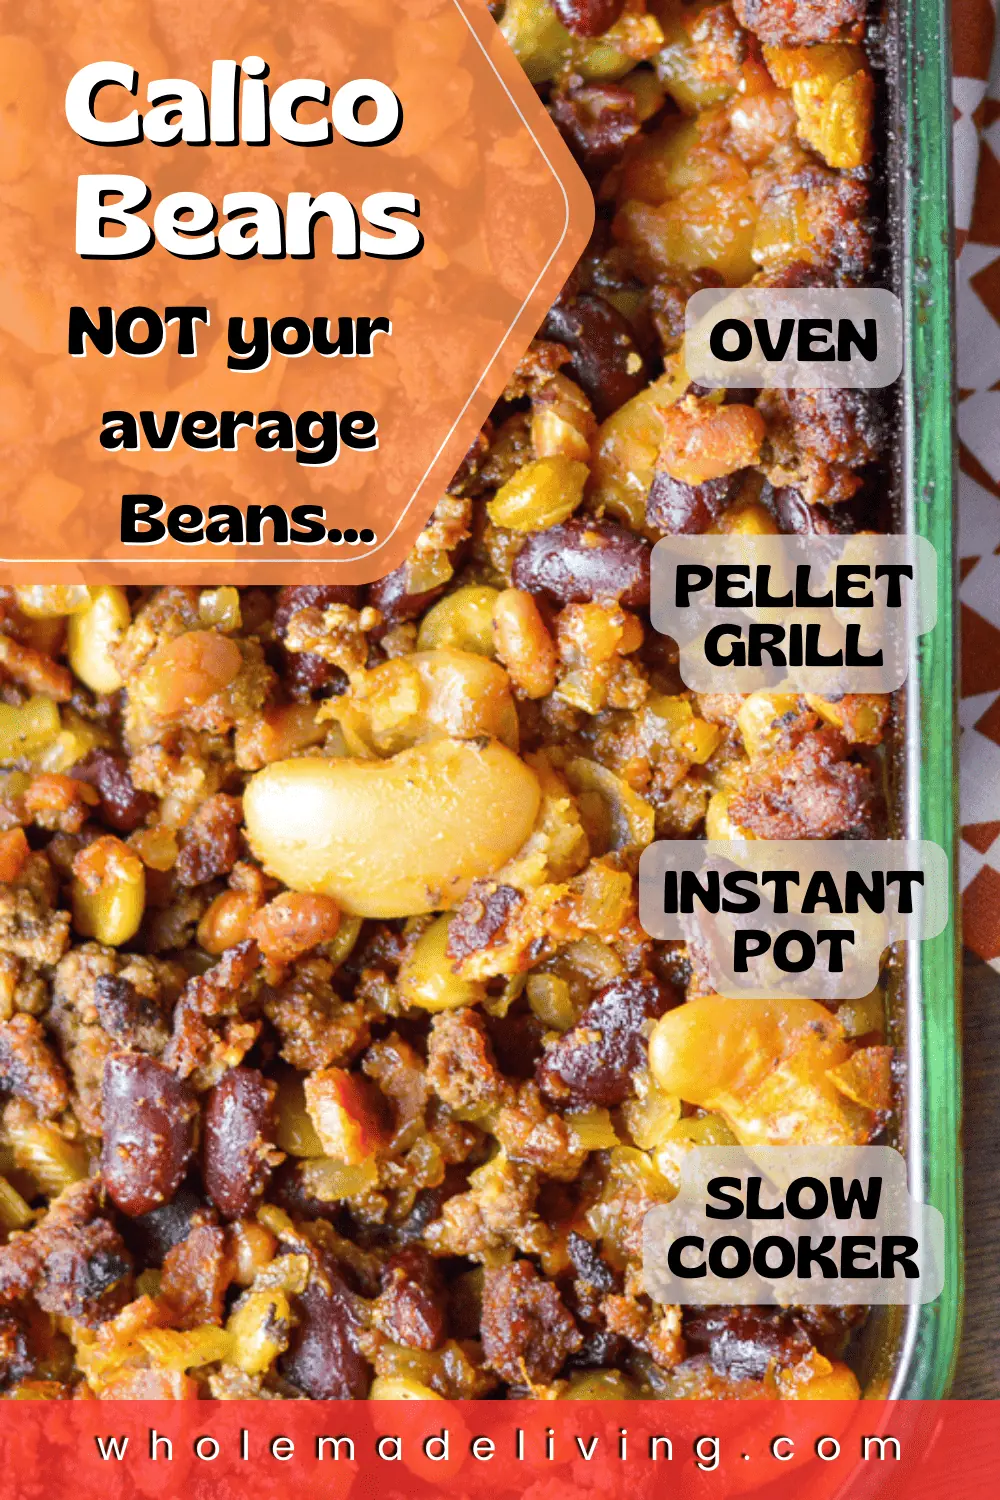 Calico Beans Pinterest Pin up close image saying not your average beans, cooked in the oven, pellet grill, instant pot and slow cooker